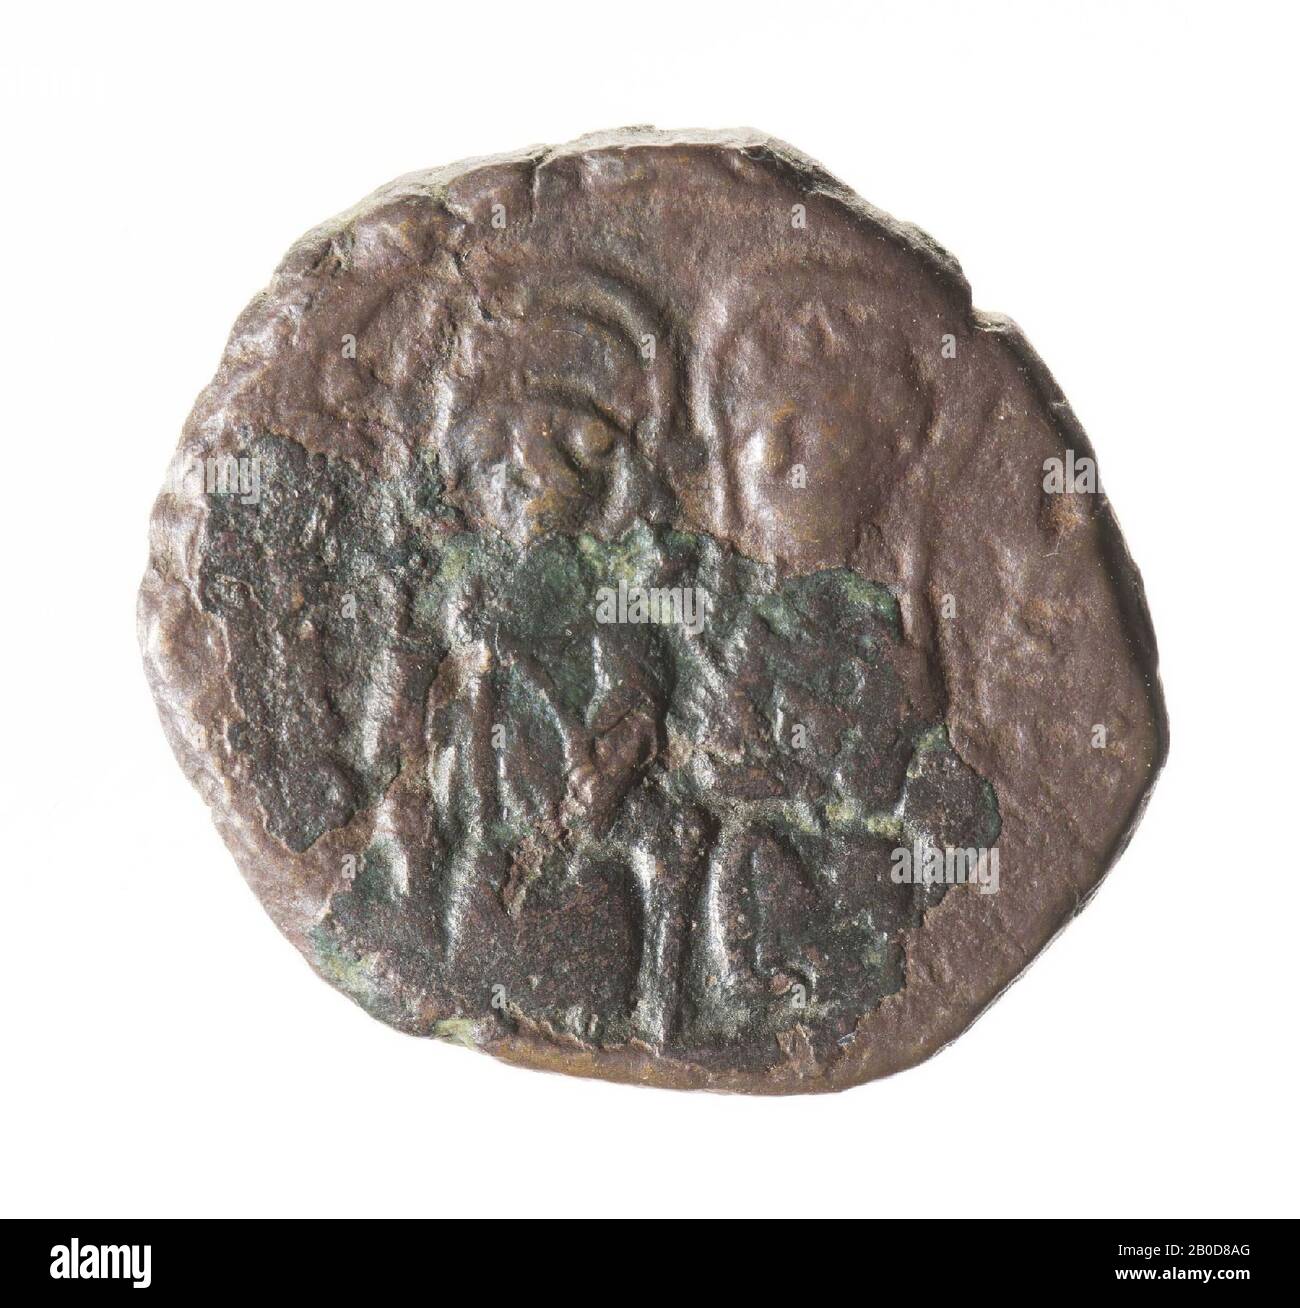 Front: Justin and Sophia, sitting on throne, both with nimbus. Justinus holds the world globe with cross and Sophia with right scepter with cross. Worn, remains of inscription. Reverse: Large K, ANNO left, star above, regnal year right, under gamma. The large (Greek) letter stands for a number and indicates the coin value. K is 20 nummi, a half follis. The lowercase letter refers to the workshop where the coin is minted., Coin, half follis of Justin II, Byzantine, metal, bronze, diam: 2,1 cm, wt. 7.07 grams, 565-578 AD, unknown Stock Photo